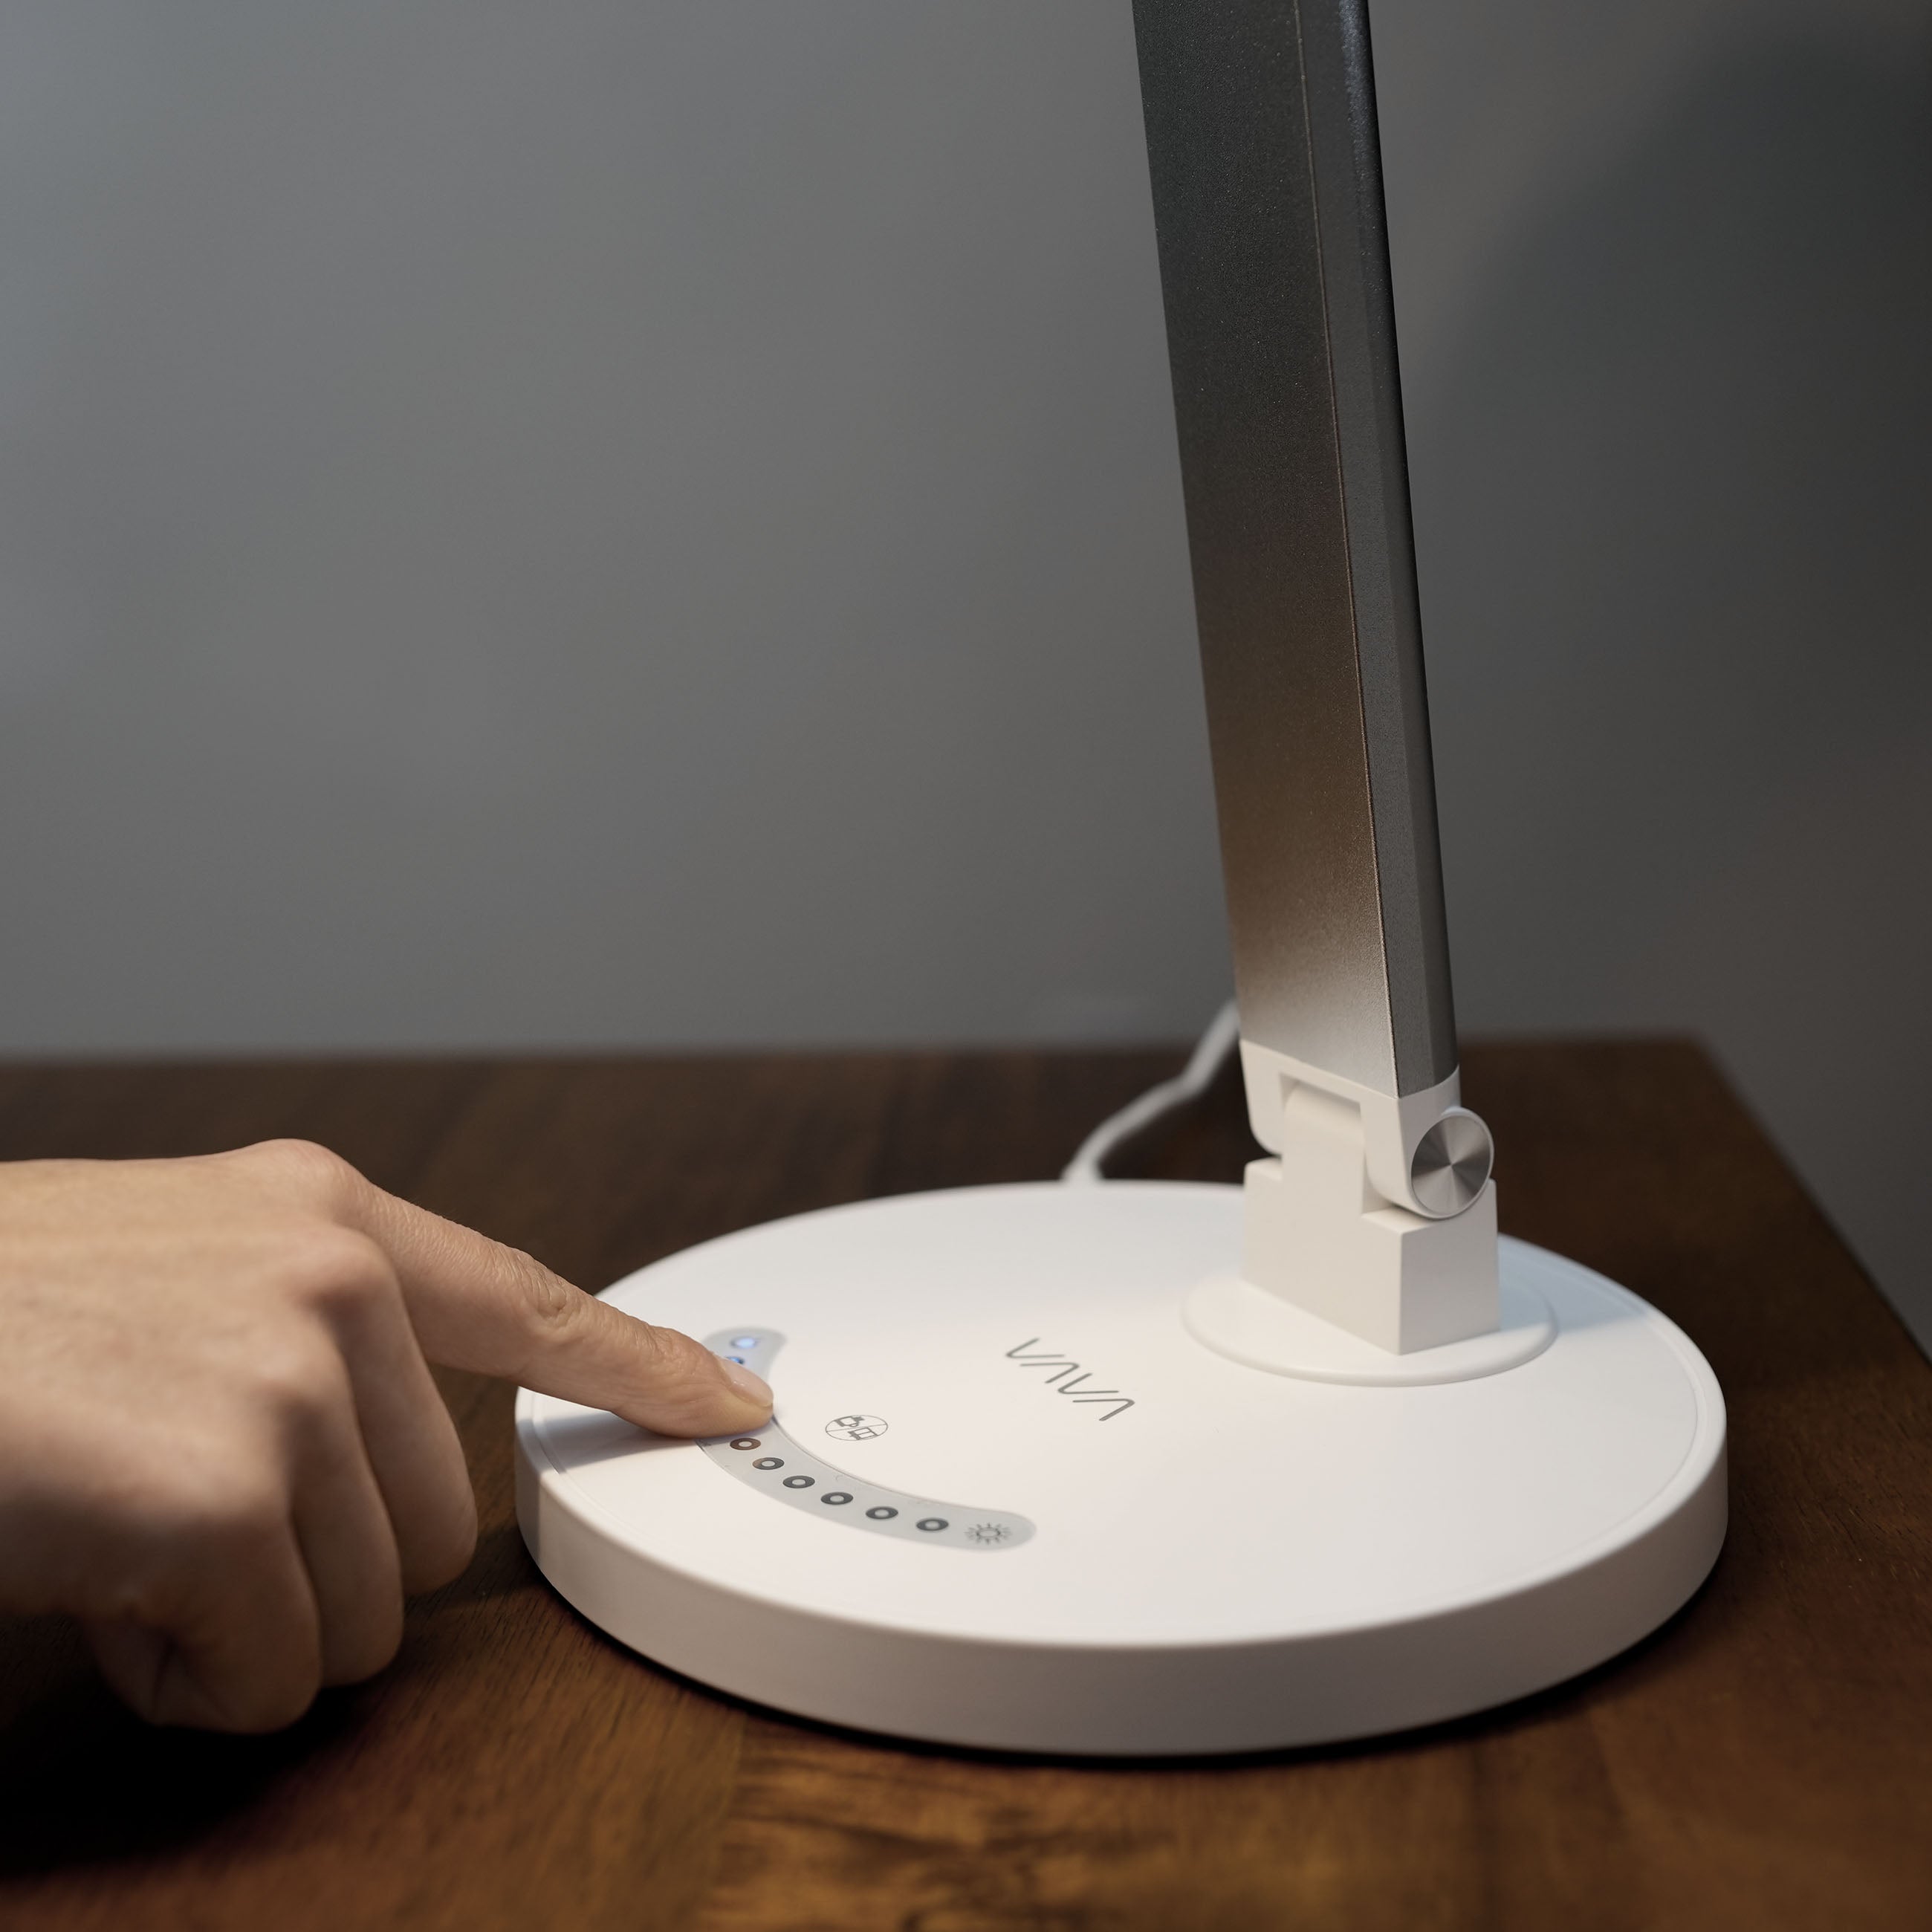  touching the digital touch controls on a White VAVA desk lamp to adjust brightness